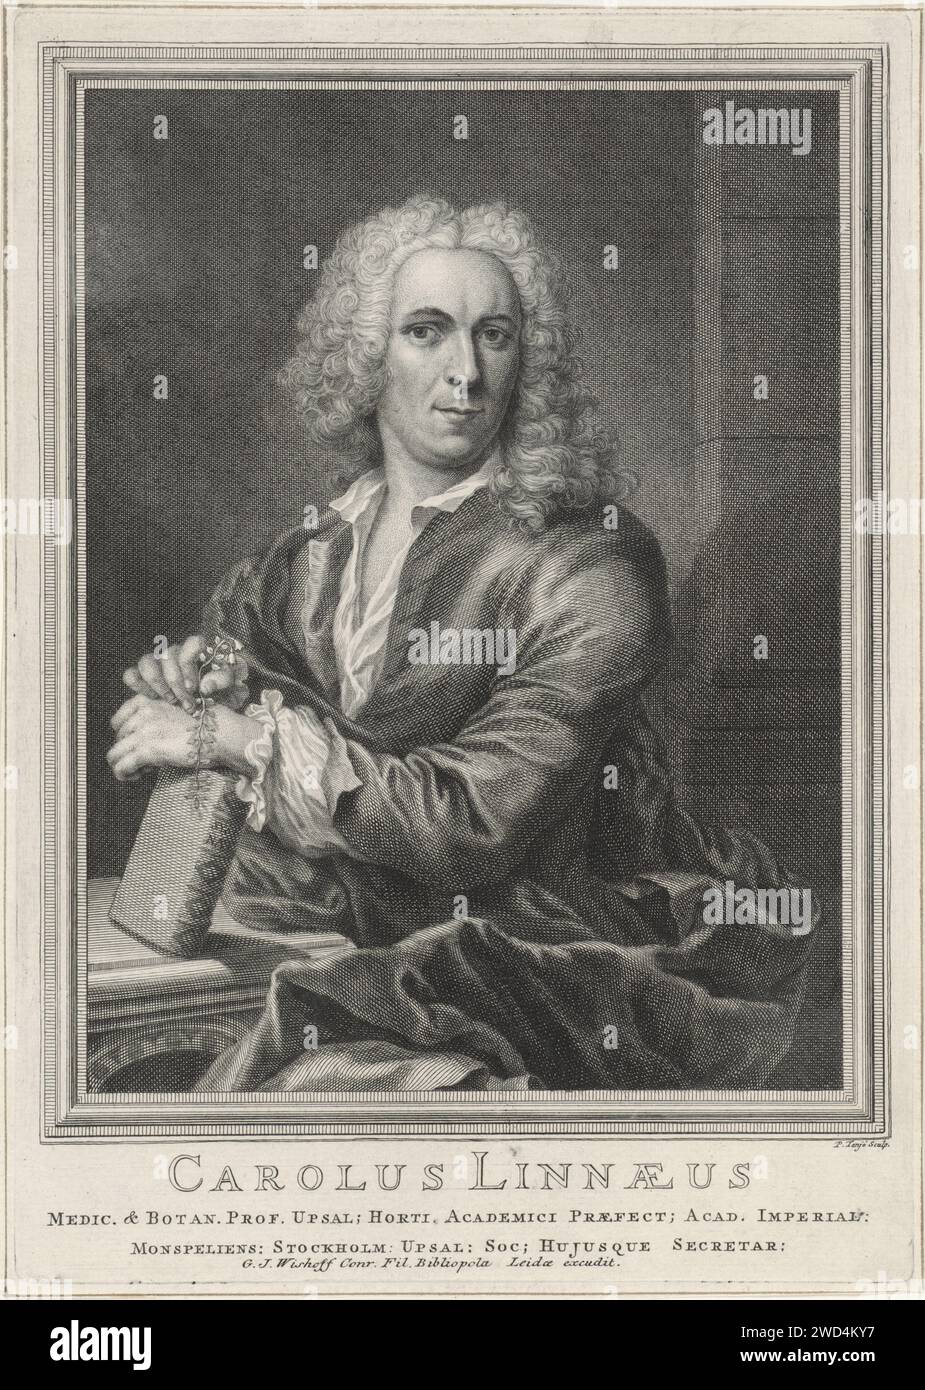 Portrait of Carolus Linaeus, Pieter Tanjé, 1716 - 1761 print Portrait of botanist Carolus Linaeus, resting his hands on his book Systema Naturae. print maker: Amsterdampublisher: Leiden paper engraving / etching flowers Stock Photo